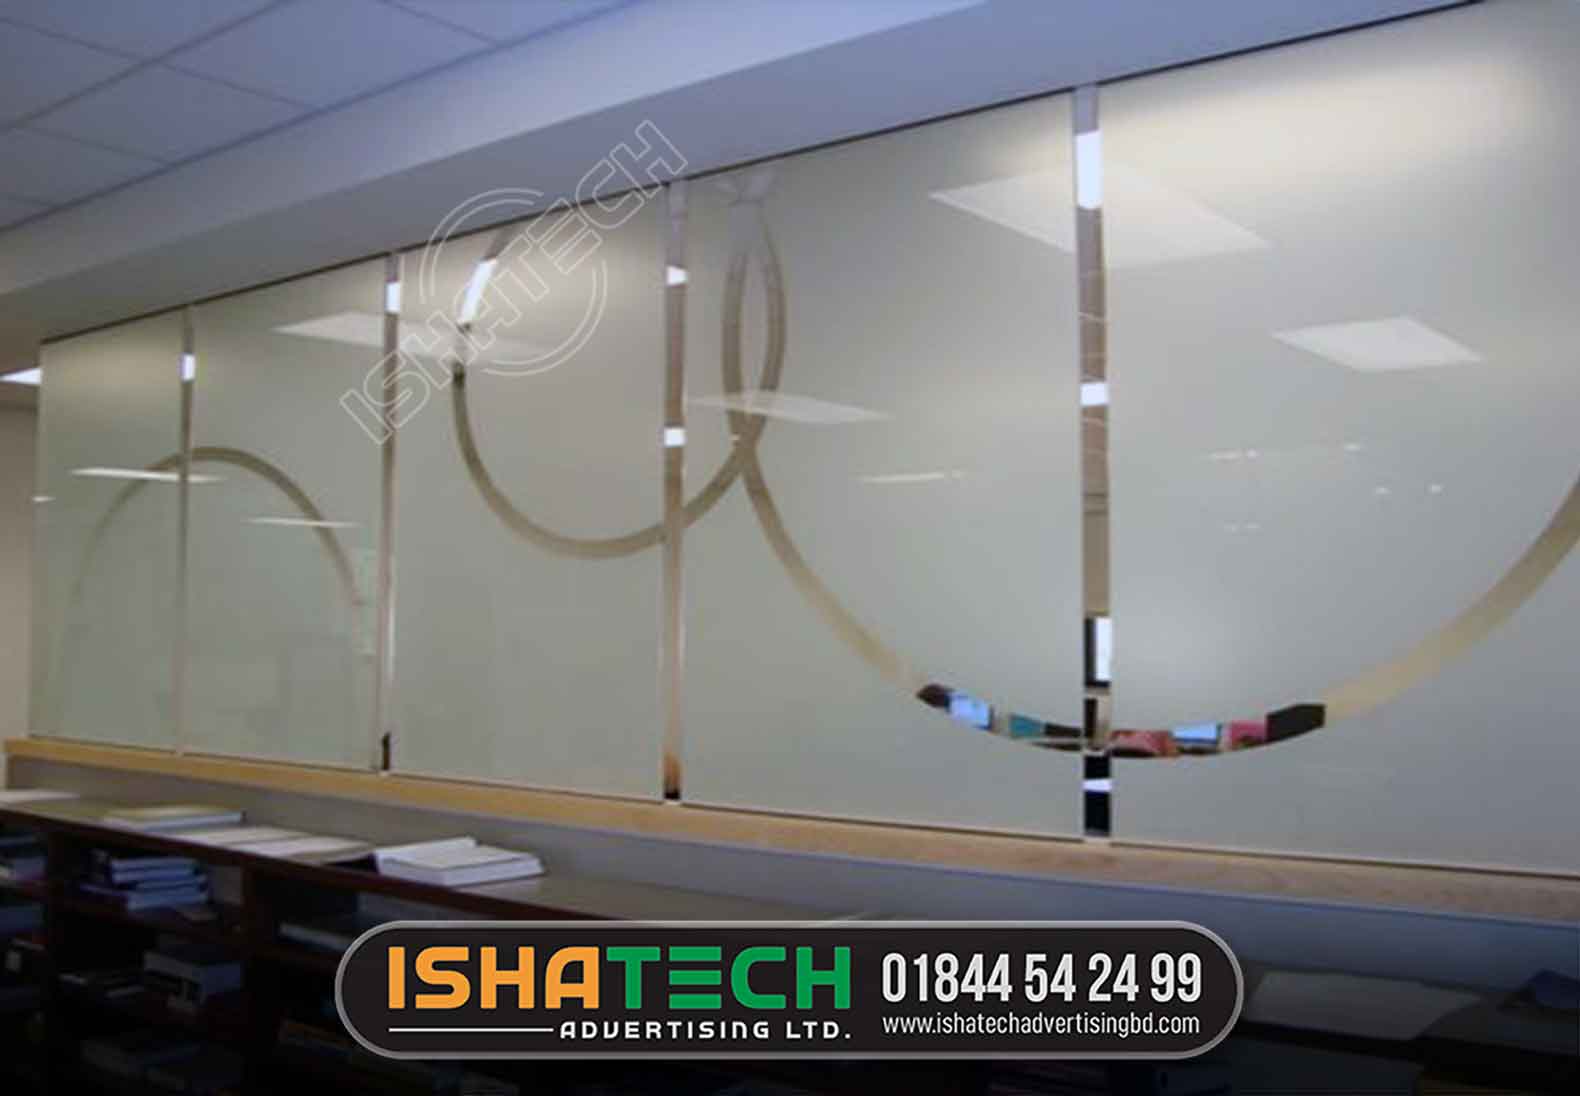 50 Frosted Office Glass Sticker Price in Bangladesh. If you’re looking to add a touch of elegance and privacy to your windows or glass surfaces, frosted glass stickers are the perfect solution.